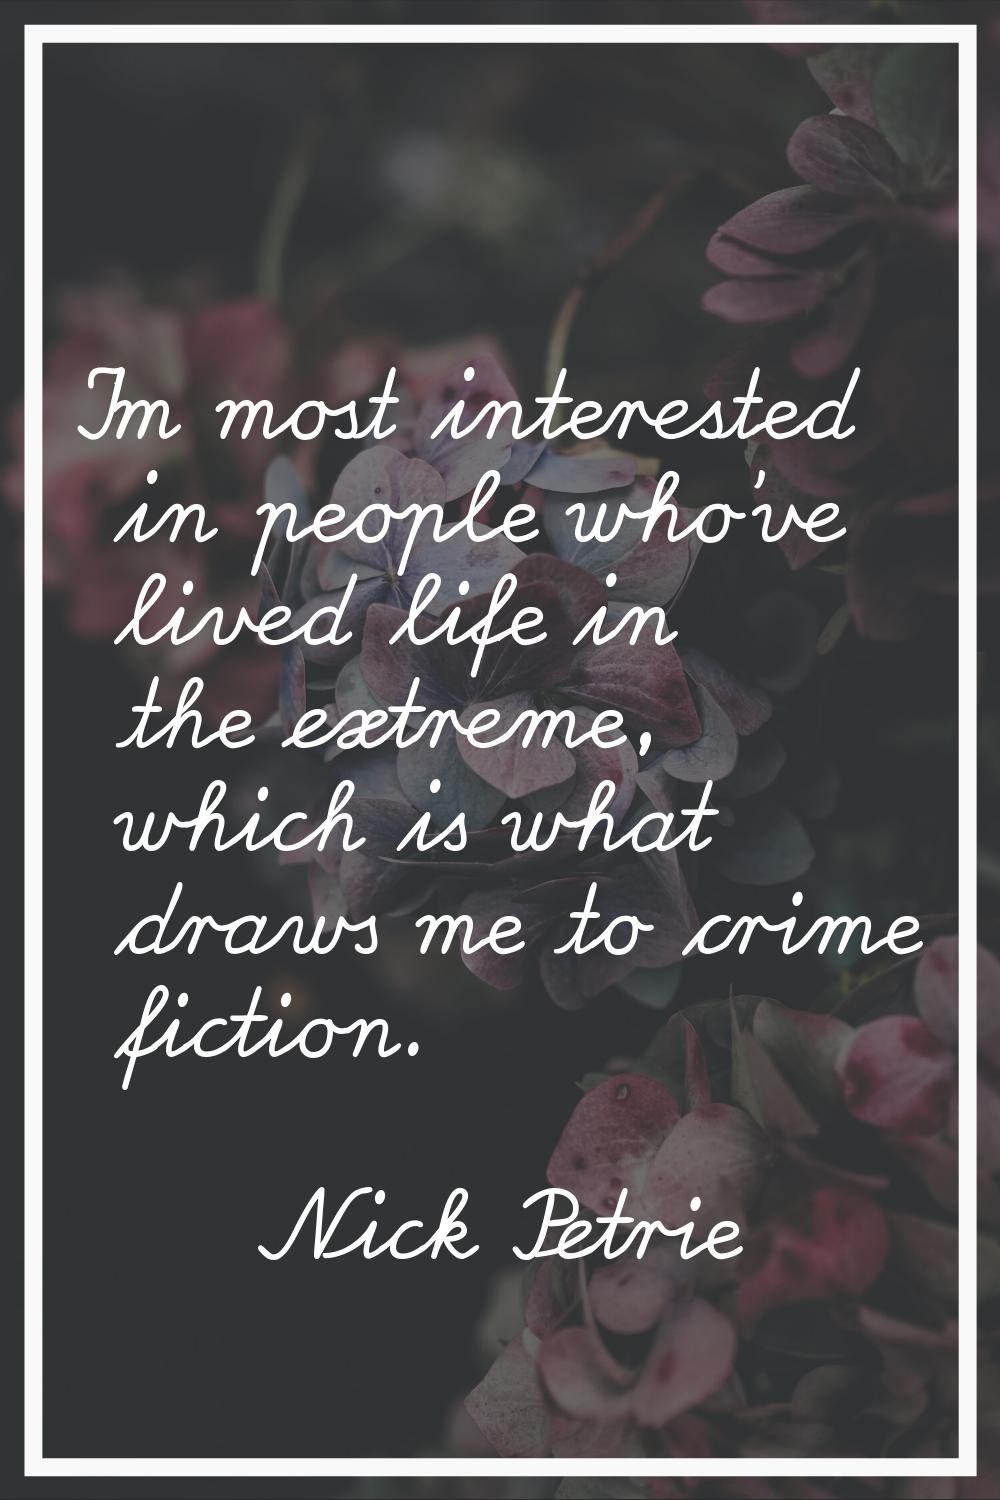 I'm most interested in people who've lived life in the extreme, which is what draws me to crime fic